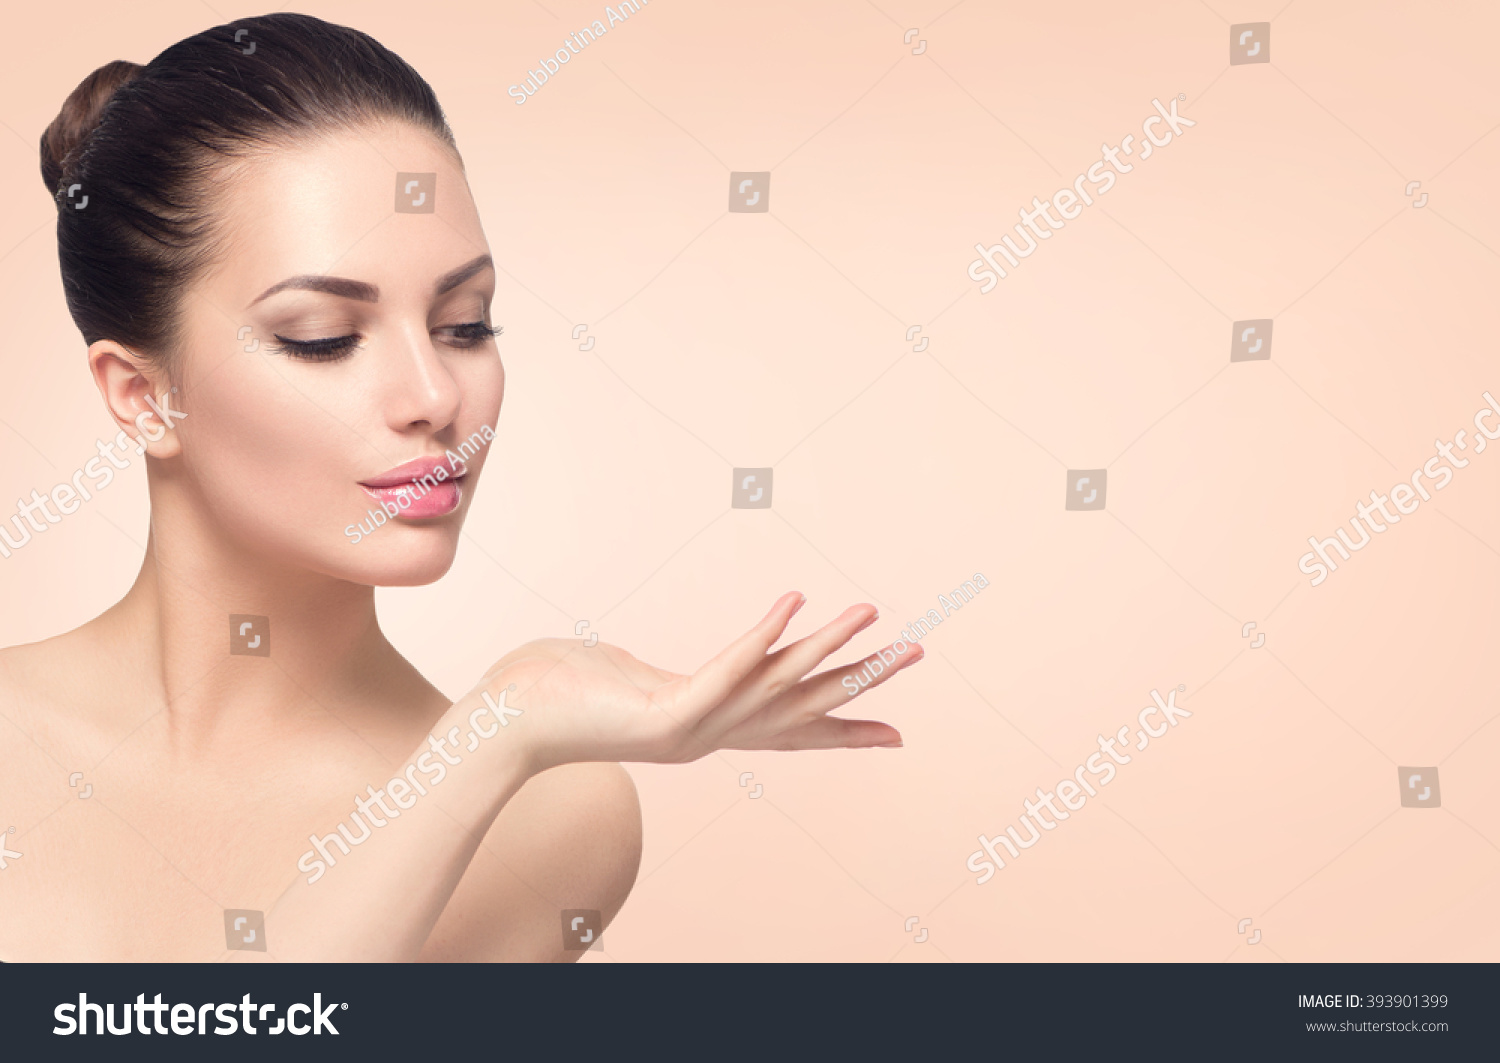 Beauty Spa Woman with perfect skin Portrait. Beautiful Brunette Spa Girl showing empty copy space on the open hand palm for text. Proposing a product. Gestures for advertisement. Beige background #393901399